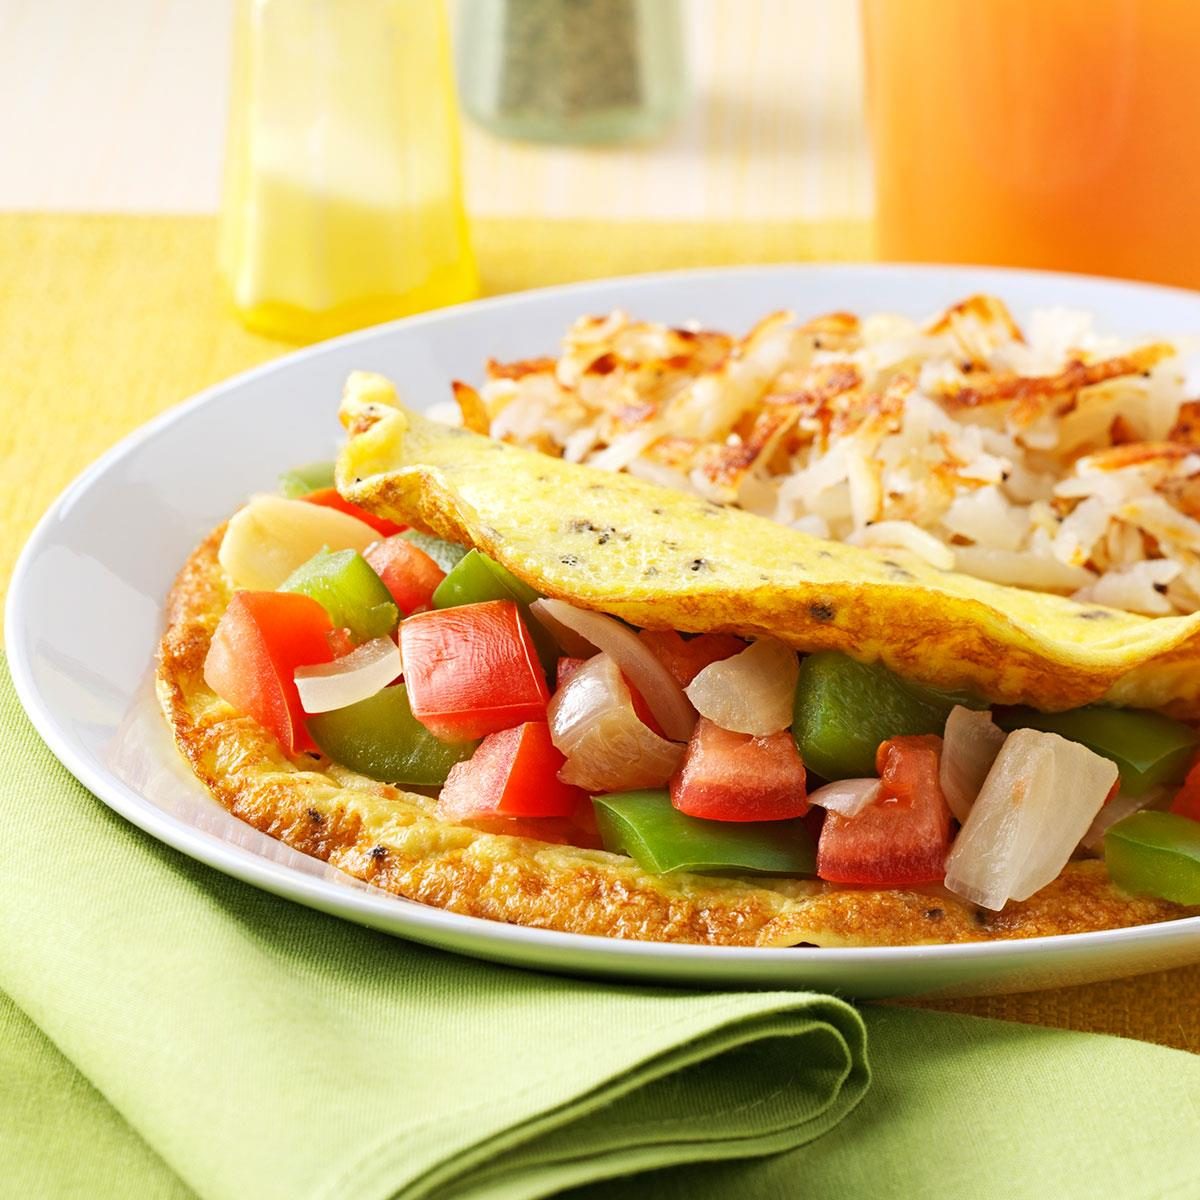 Tomato and Green Pepper Omelet Recipe: How to Make It